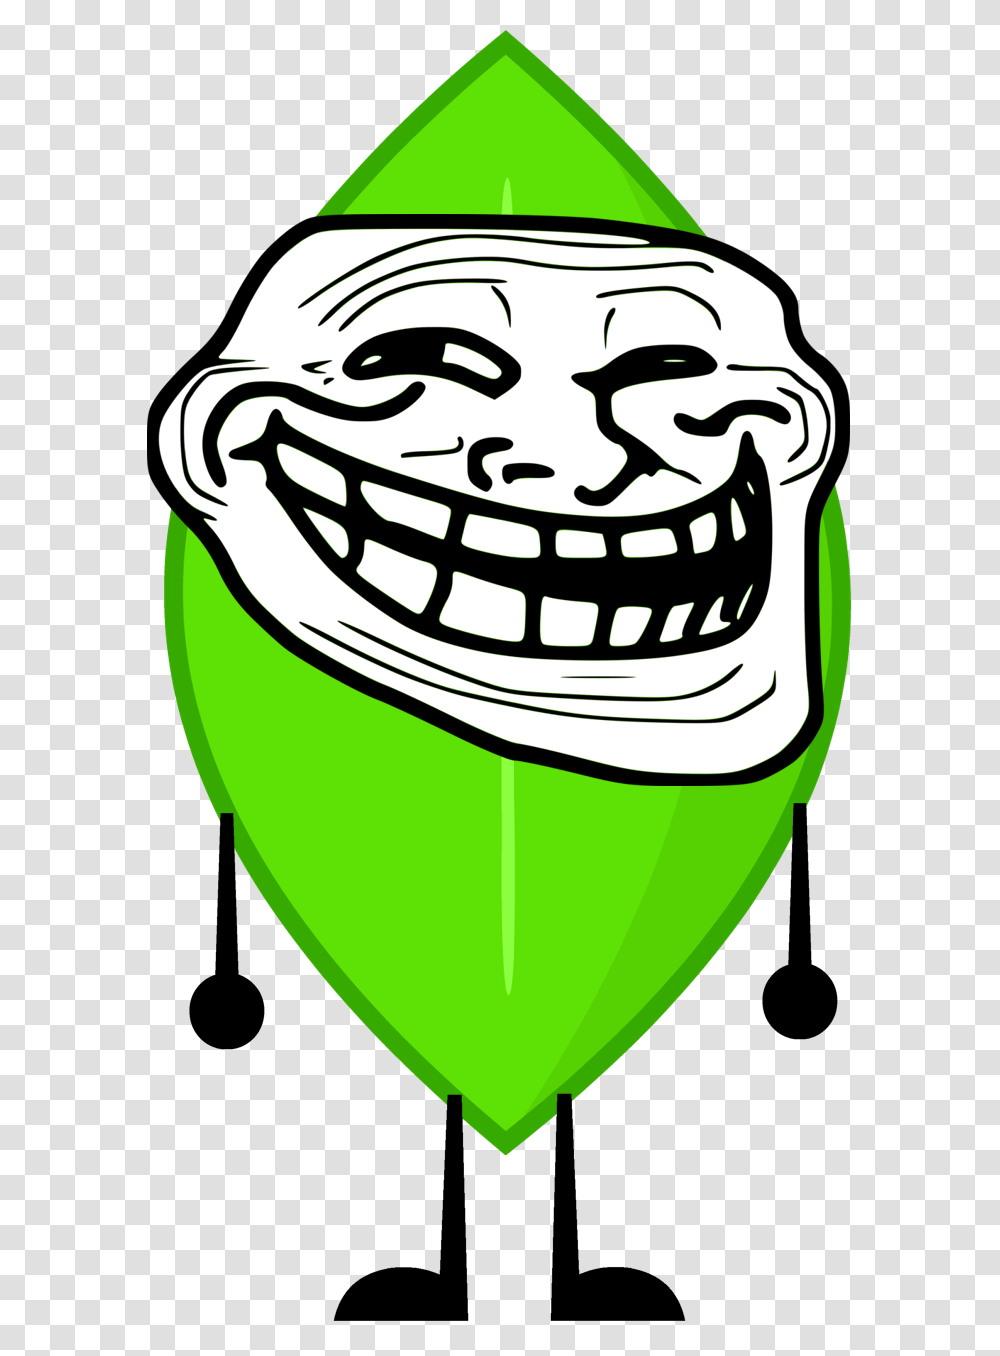 Image Result For Bfdi Recommended Characters Leafy Troll Face, Nature, Outdoors, Sea, Water Transparent Png